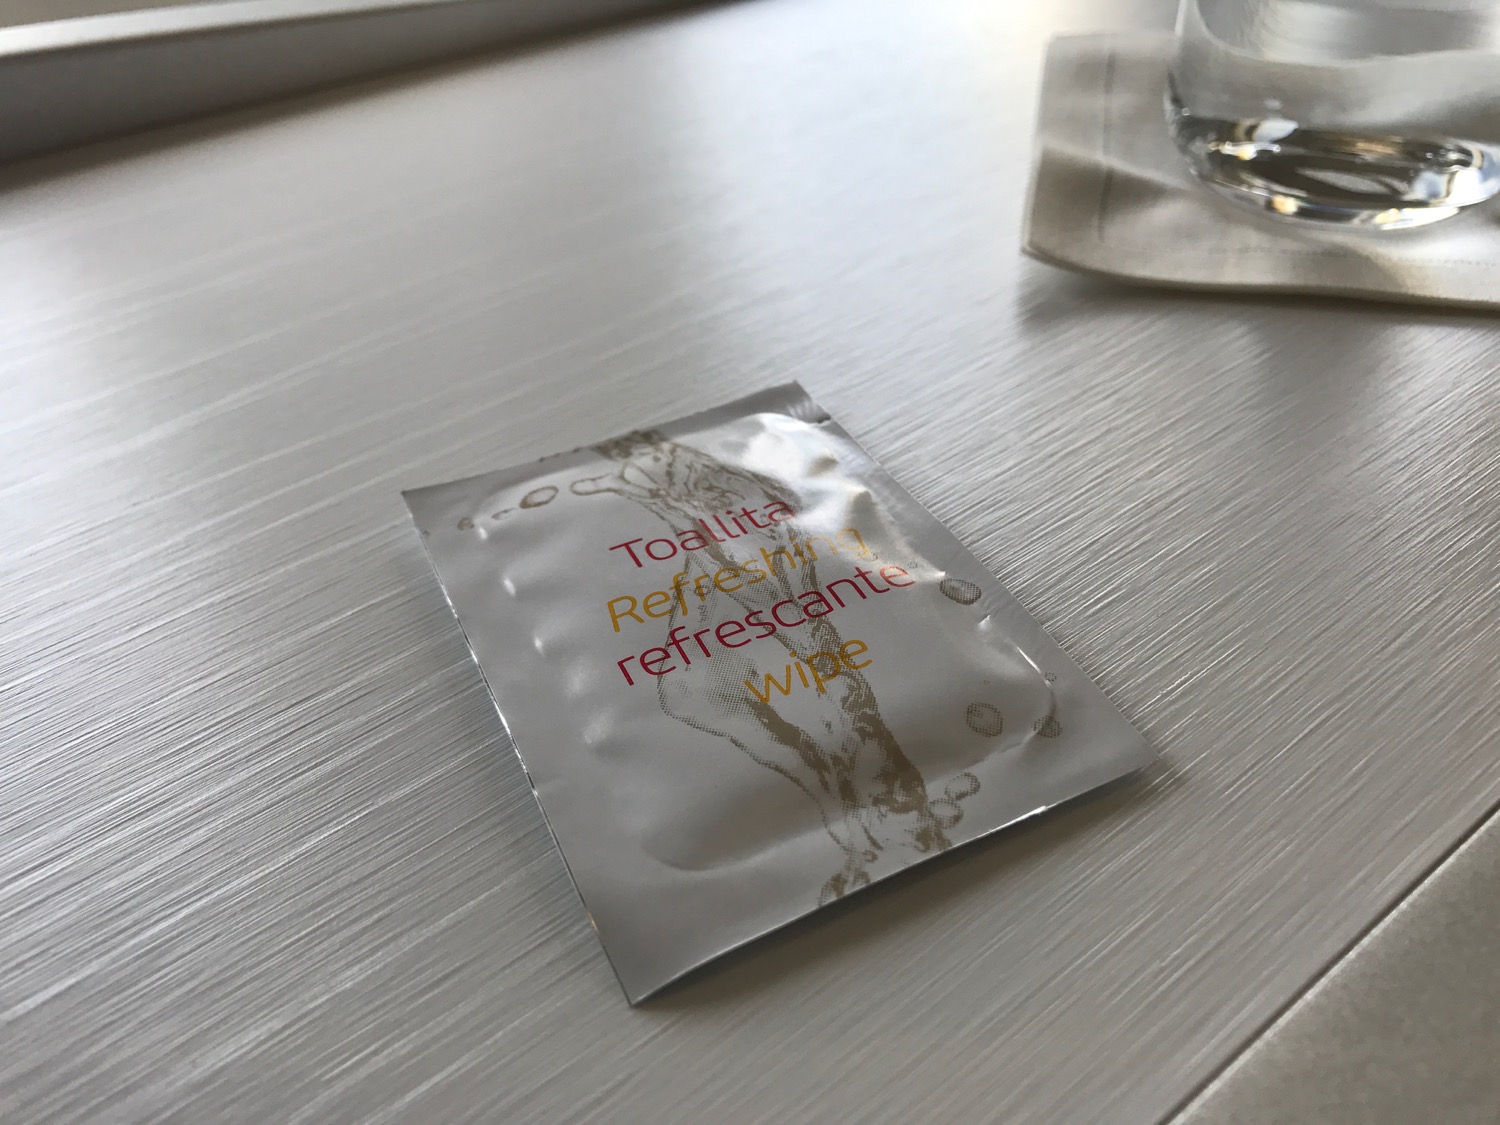 a small packet of liquid on a table